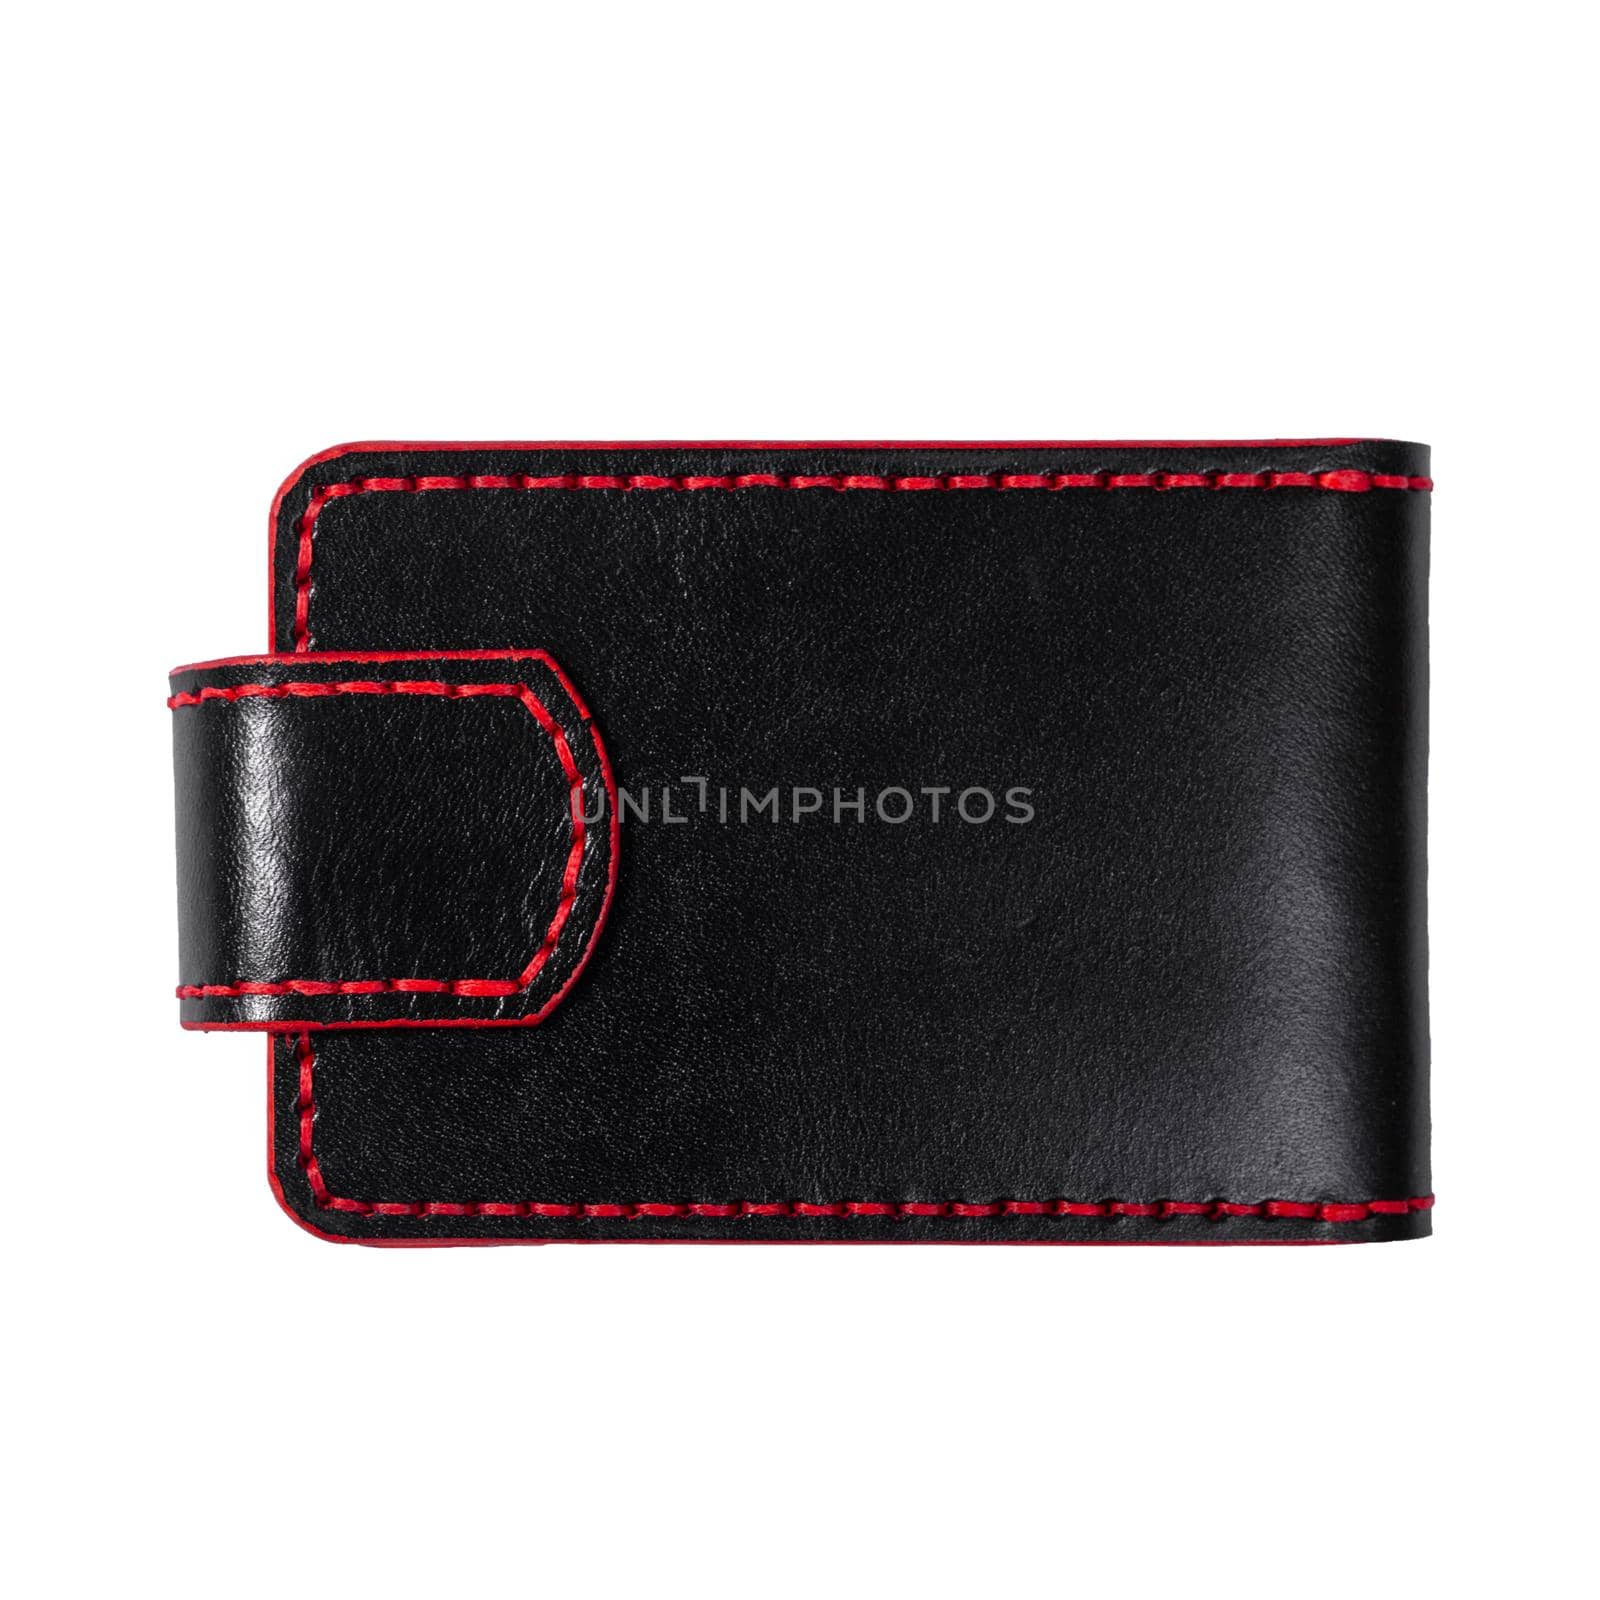 Luxury craft business card holder case made of leather. by BY-_-BY